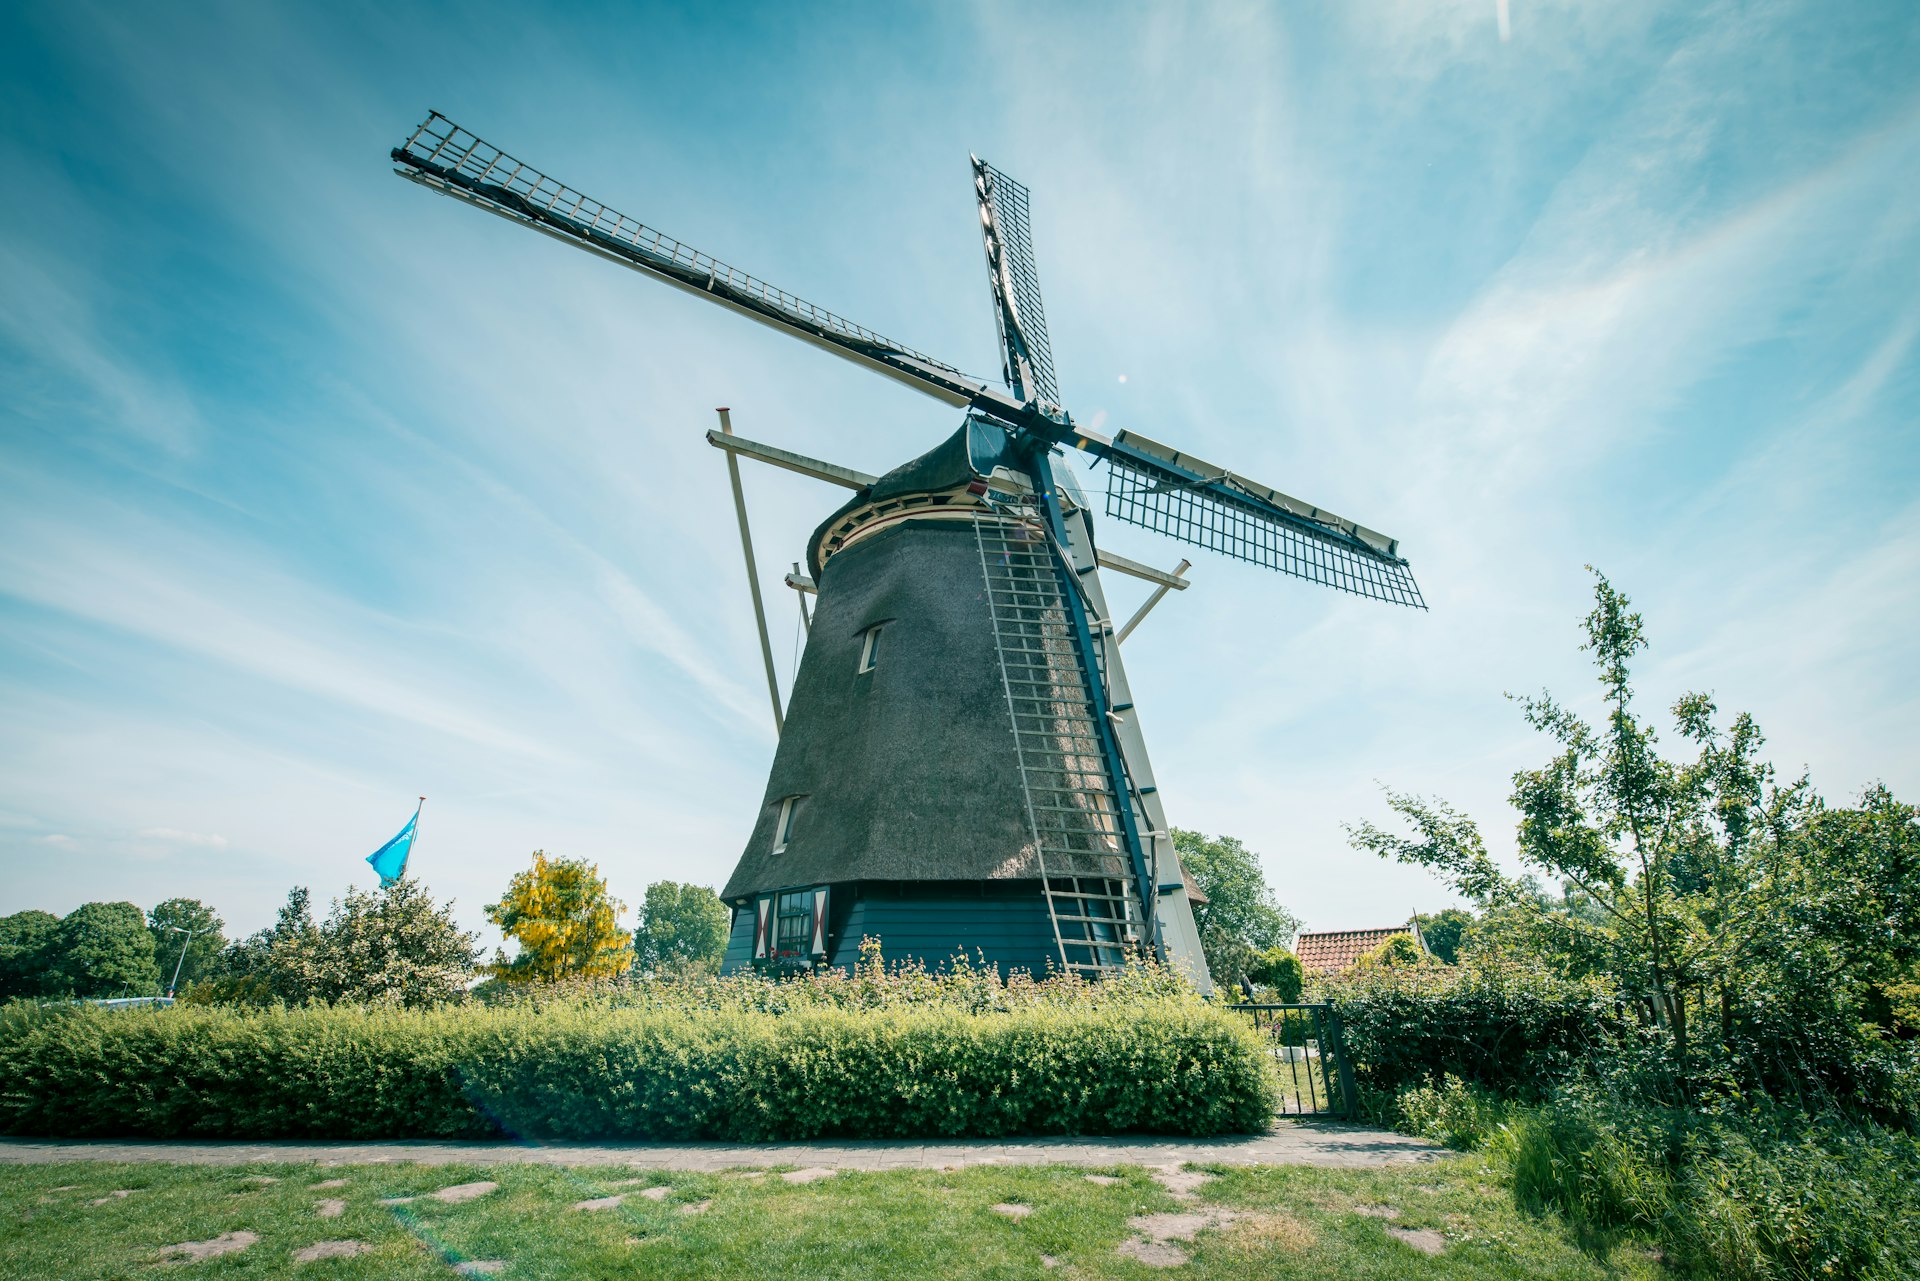 A traditional Dutch wooden windmill in parkland